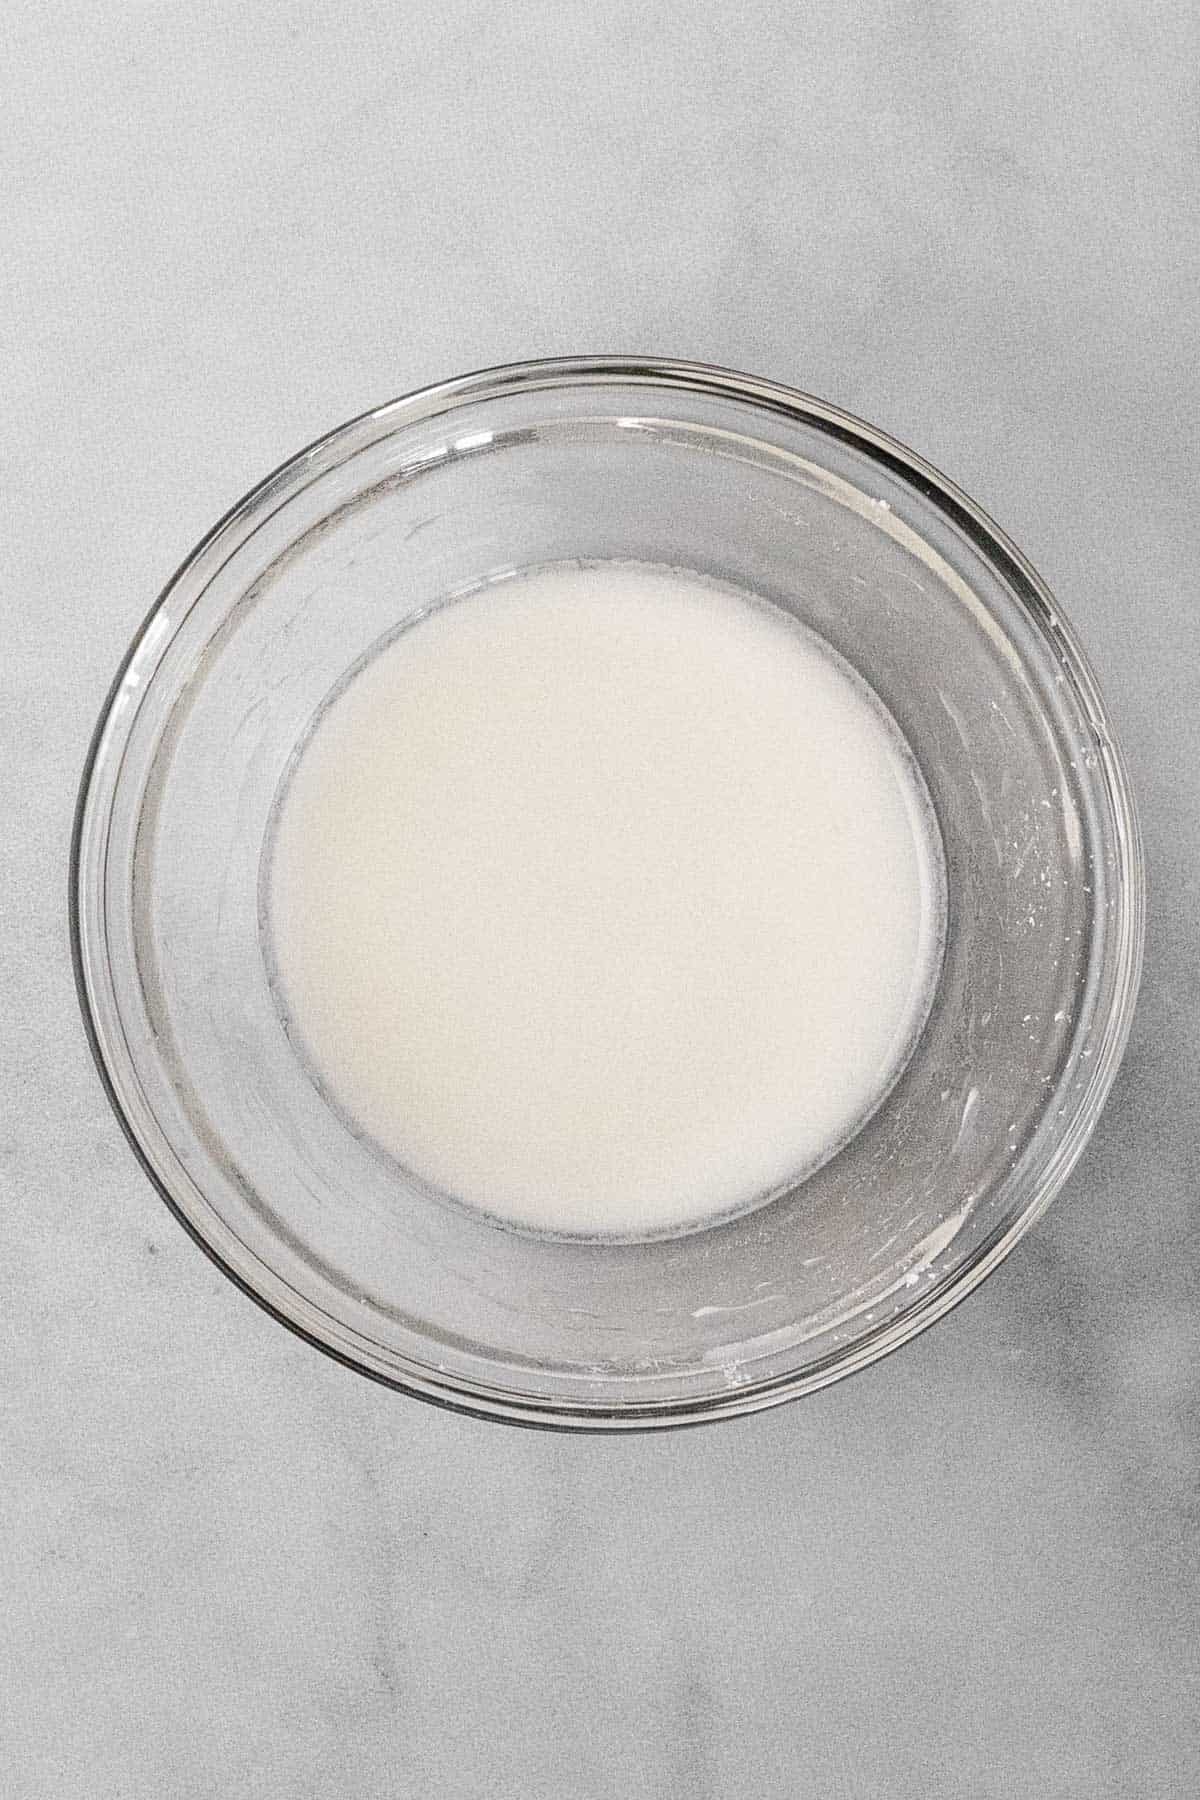 A corn starch slurry in a glass mixing bowl.